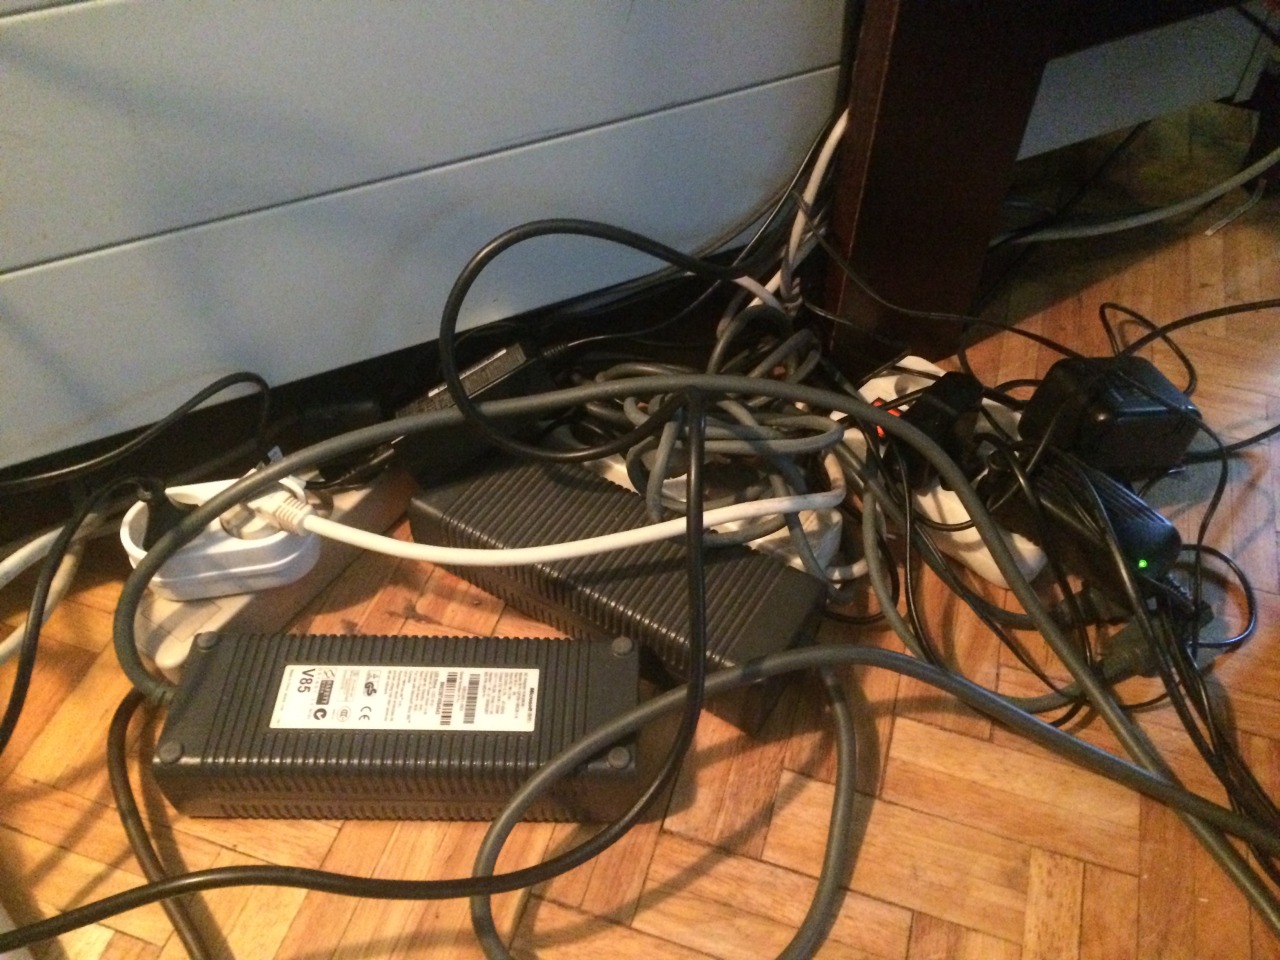 F*cking Cables :-D